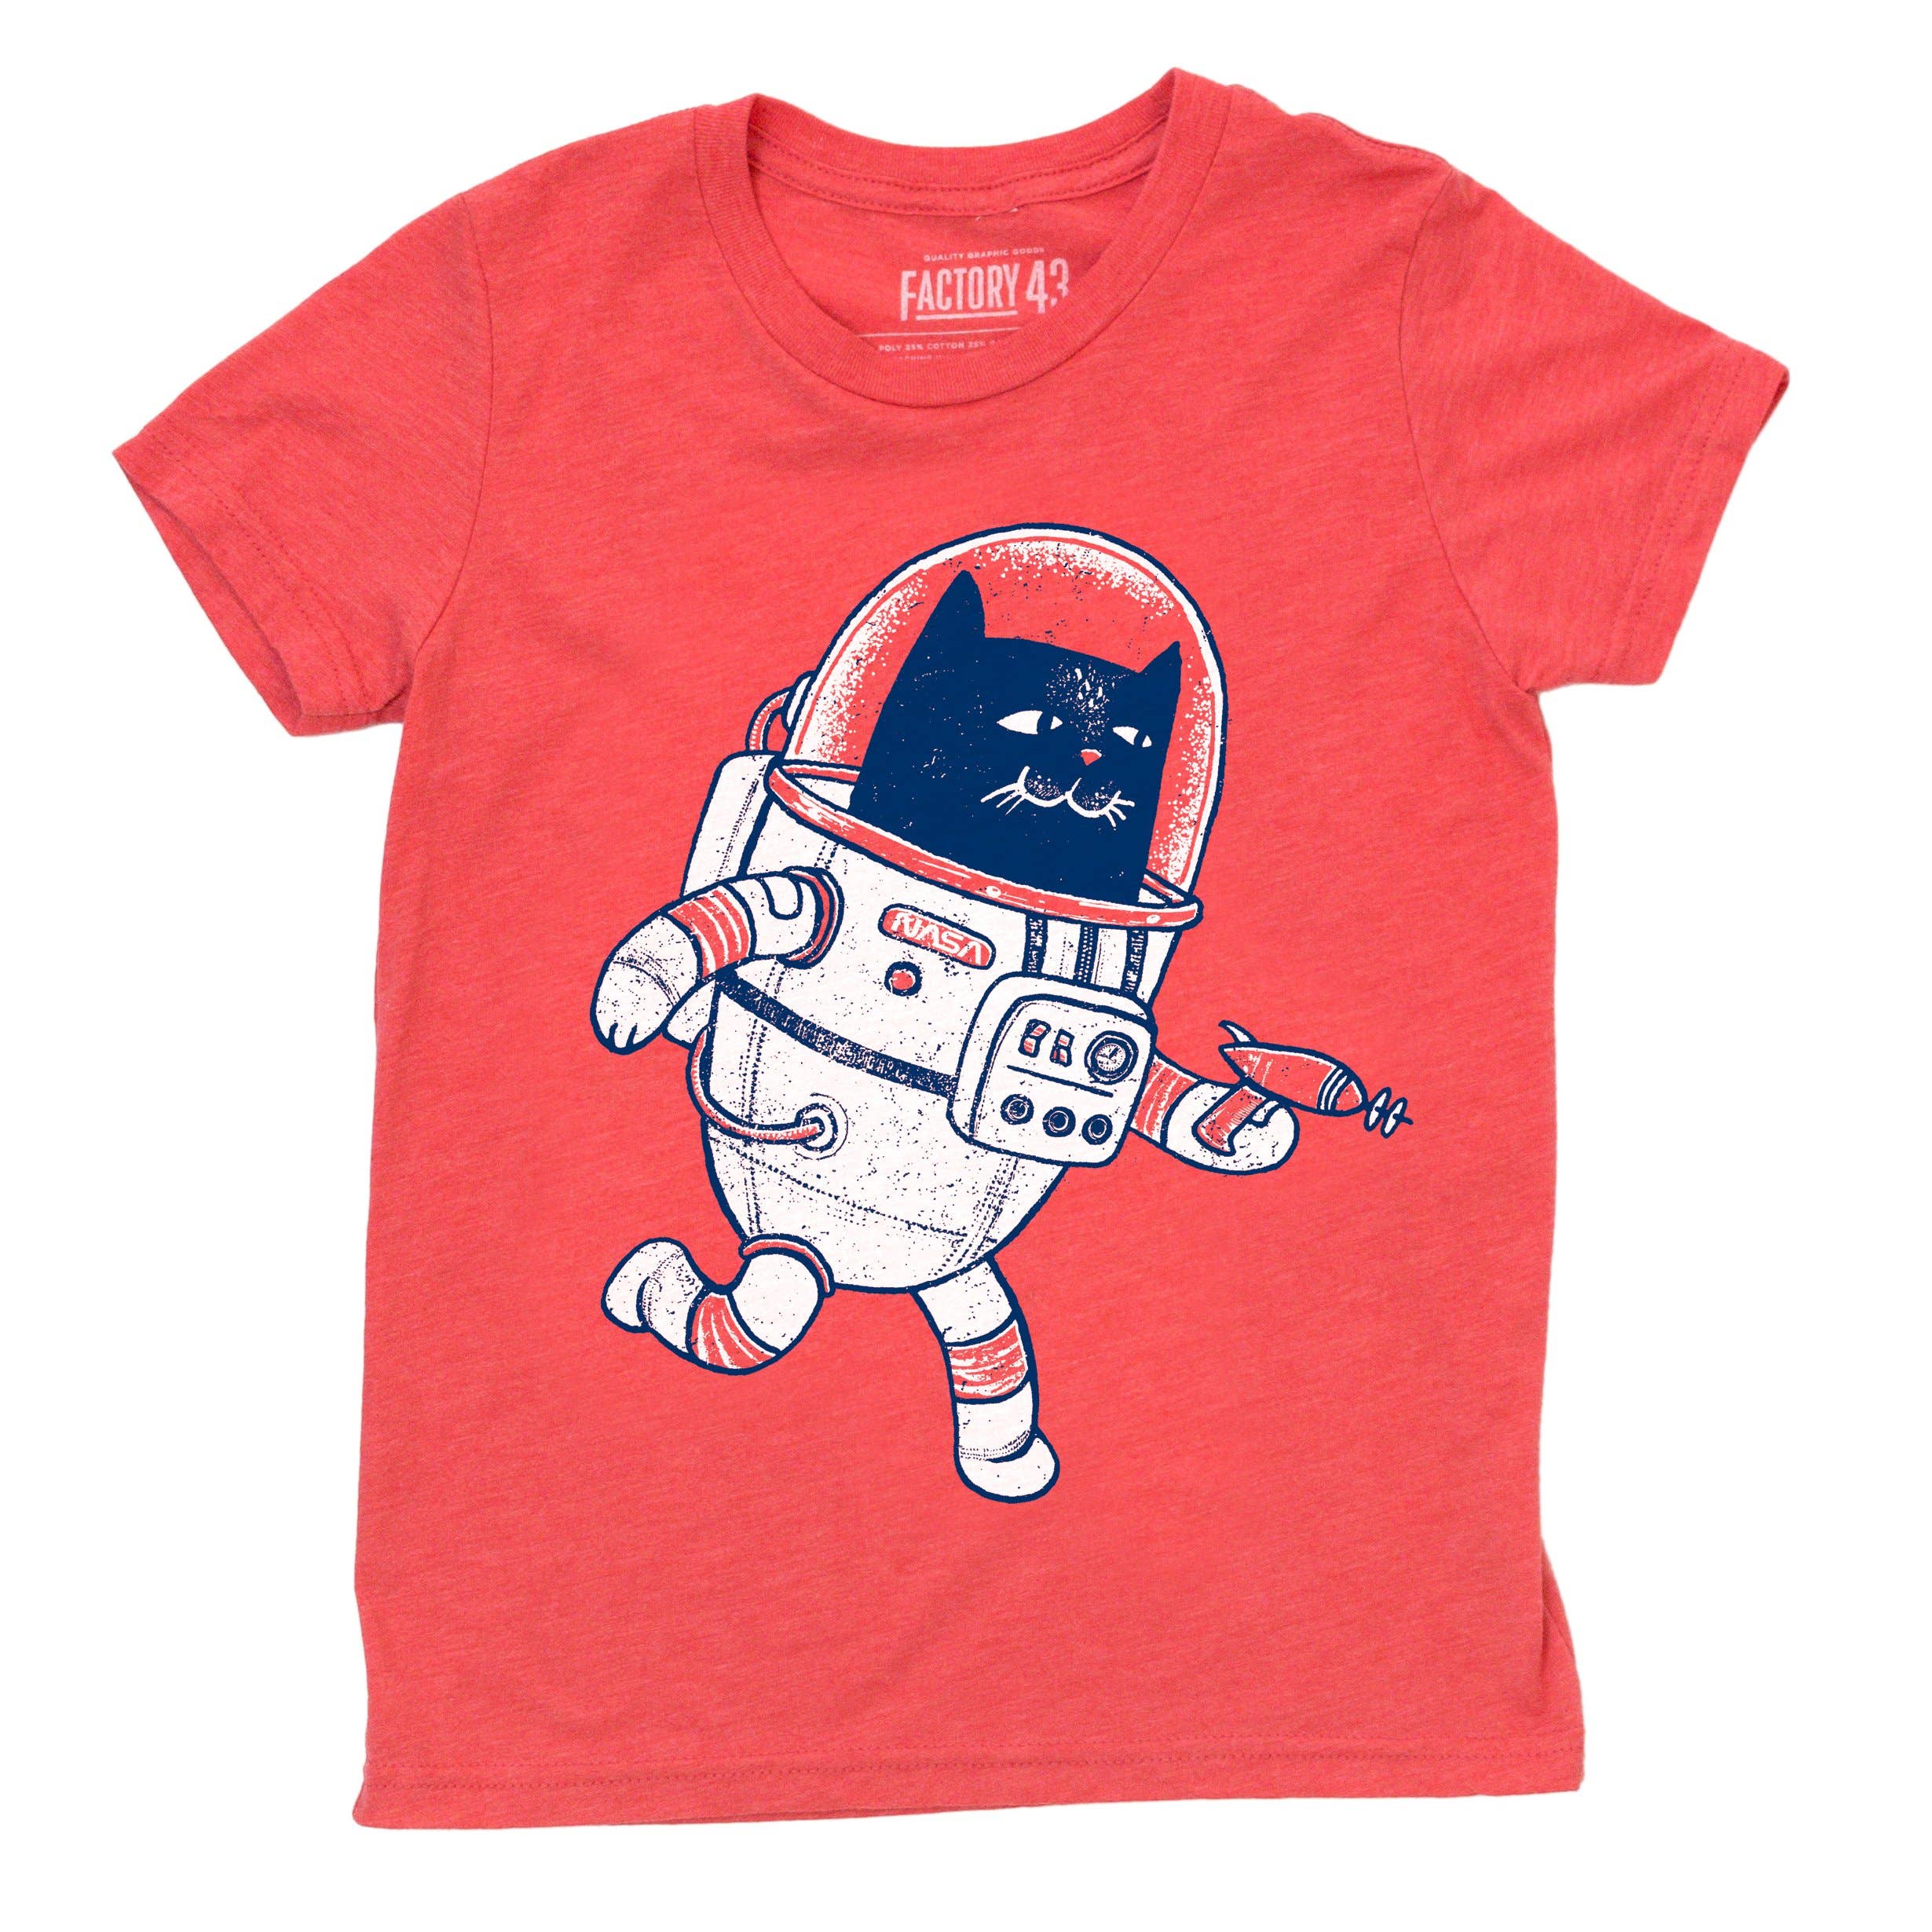 Factory 43 - Space Cat Youth Shirt: YOUTH L (14-16)